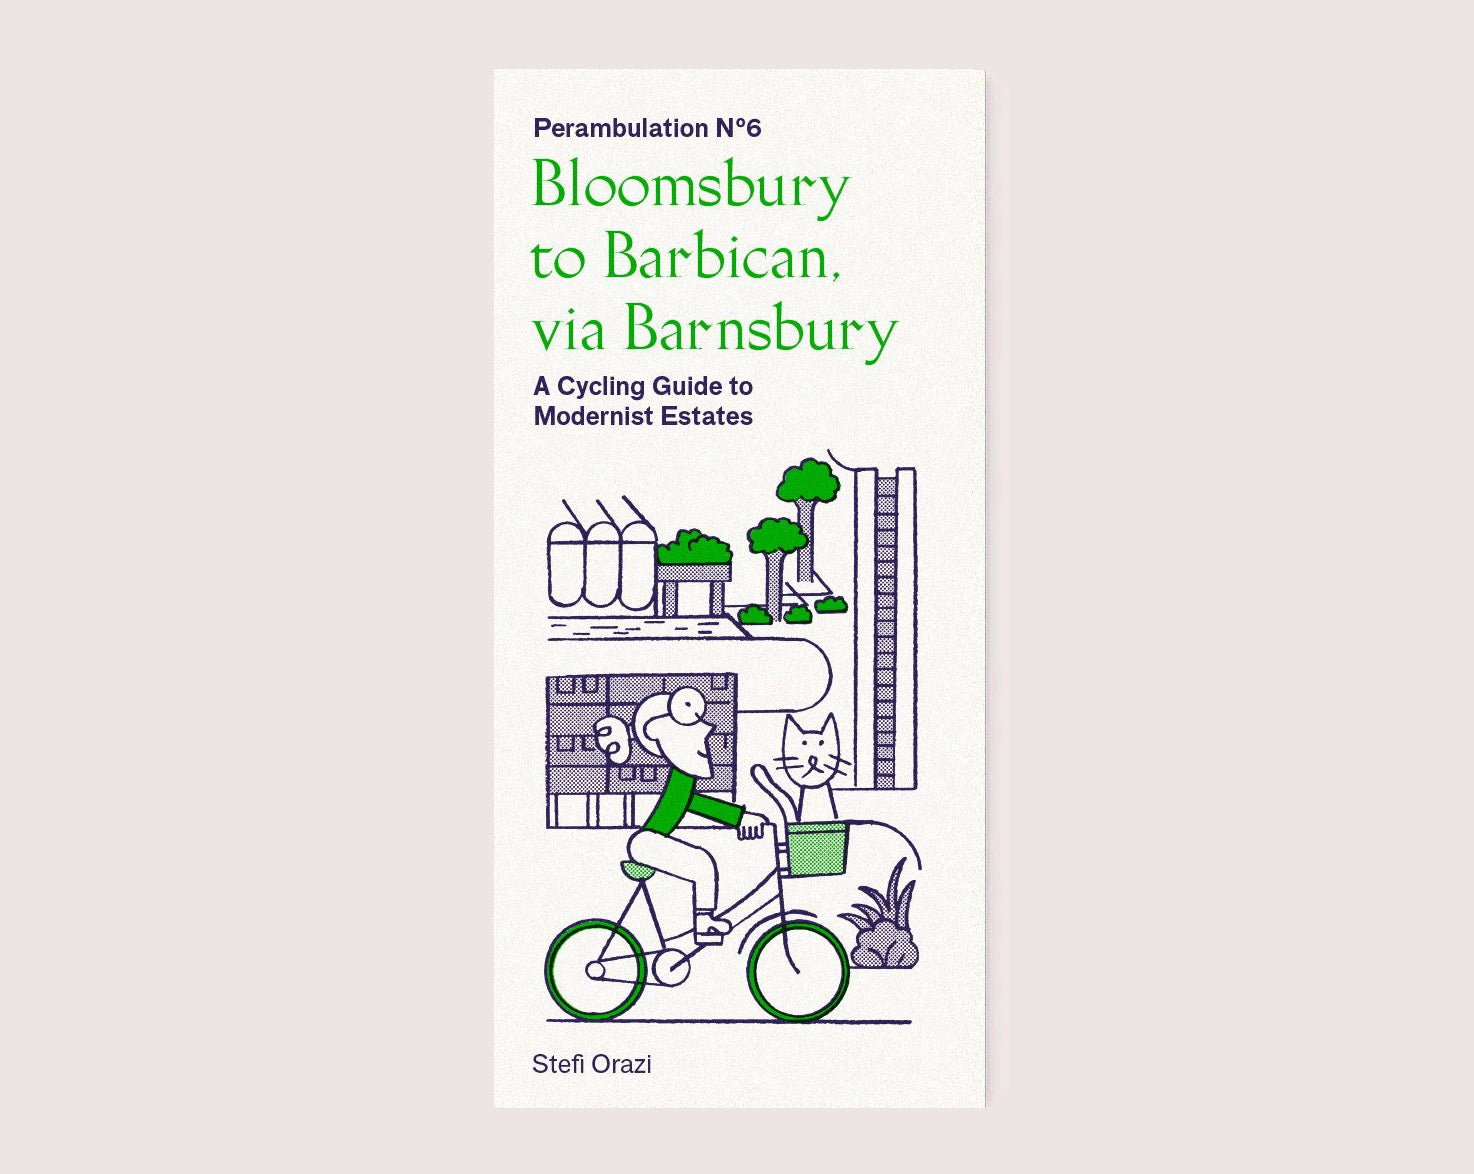 Perambulation Nº6—A Cycling Guide to Modernist Estates from Bloomsbury to Barbican by Stefi Orazi